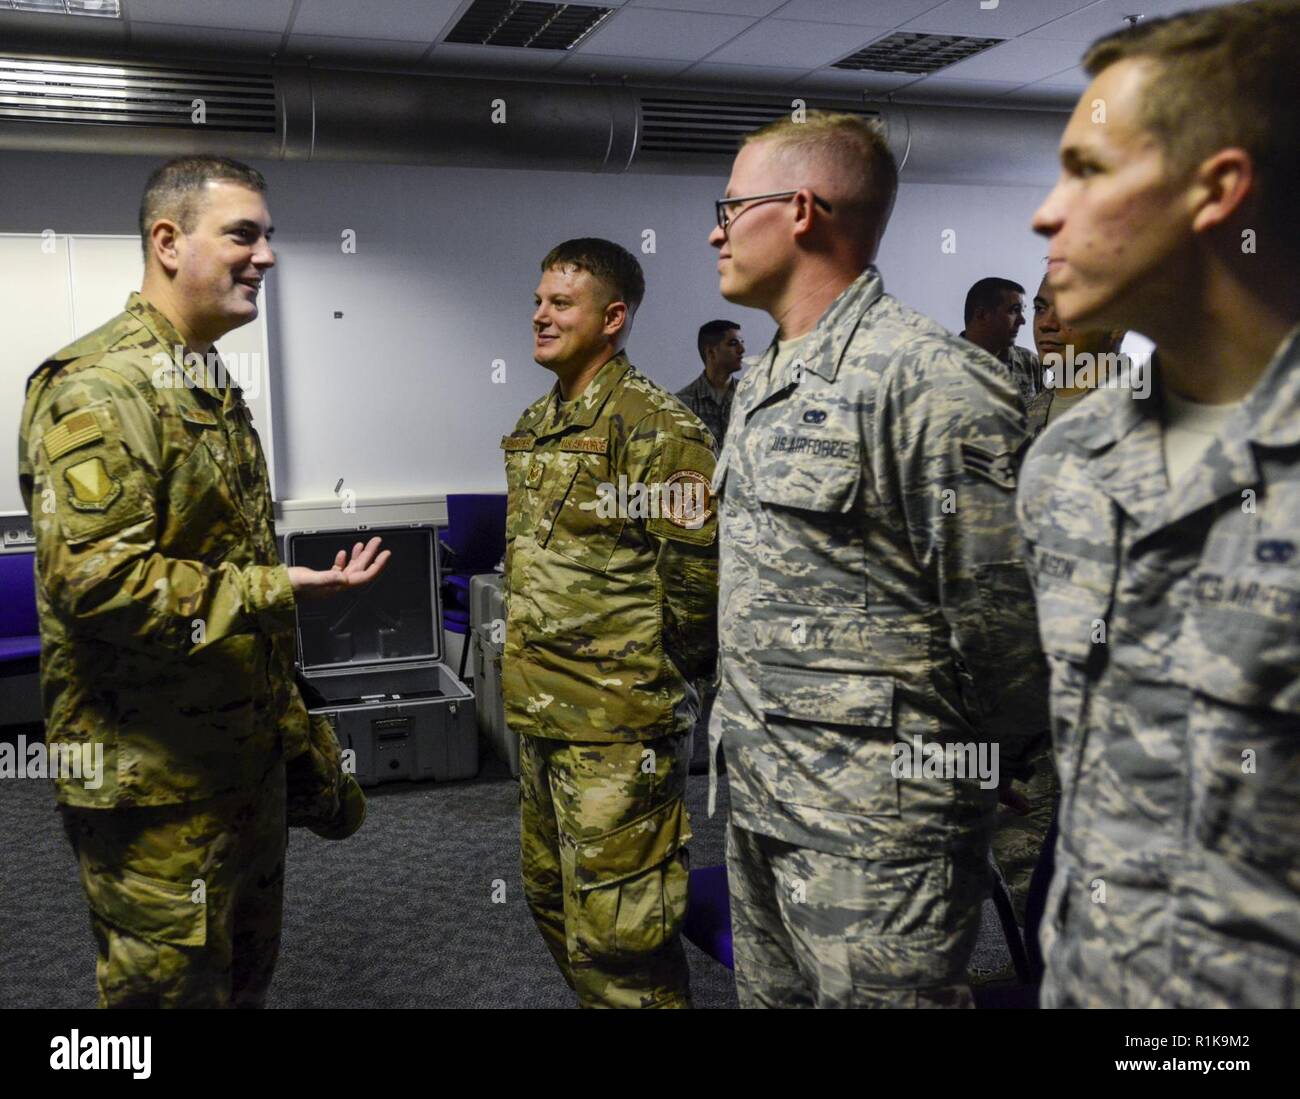 U.S. Air Force Brig. Gen. Mark R. August, 86th Airlift Wing commander, speaks with Airmen of the 86th Aircraft Maintenance Squadron during an immersion tour of the 86th Maintenance Group on Ramstein Air Base, Germany, Oct. 9, 2018. August and Chief Master Sgt. Ernesto J. Rendon Jr., 86th AW command chief, used the immersion as a way to get a better understanding of the 86th MXG’s capabilities as well as a way for Airmen to ask questions directly to the wing leaders. Stock Photo